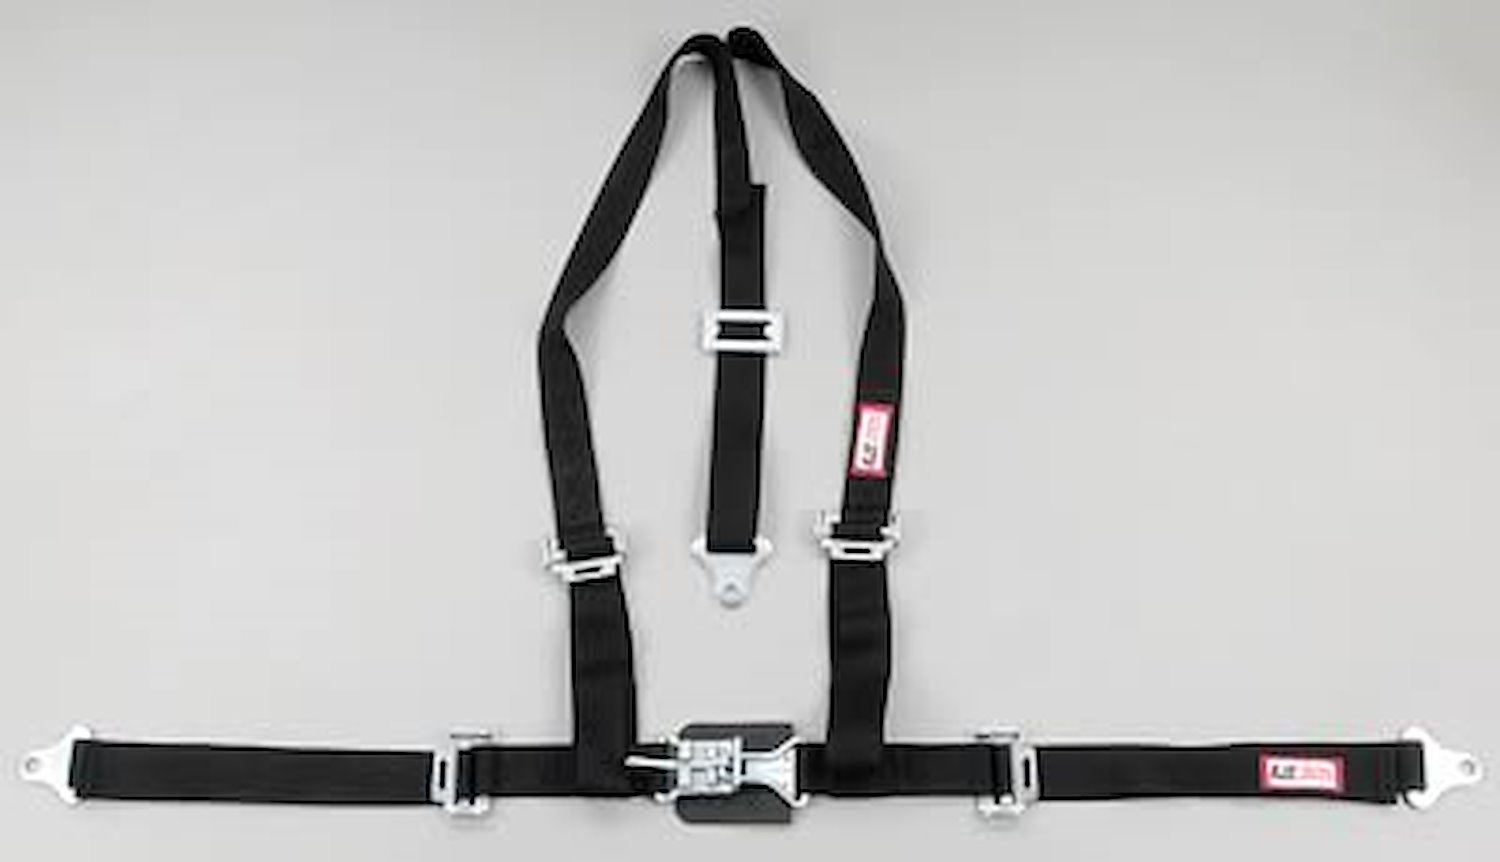 NON-SFI L&L HARNESS 3 PULL DOWN Lap Belt w/adjuster 2 S.H. V ROLL BAR Mount ALL SNAP ENDS GRAY